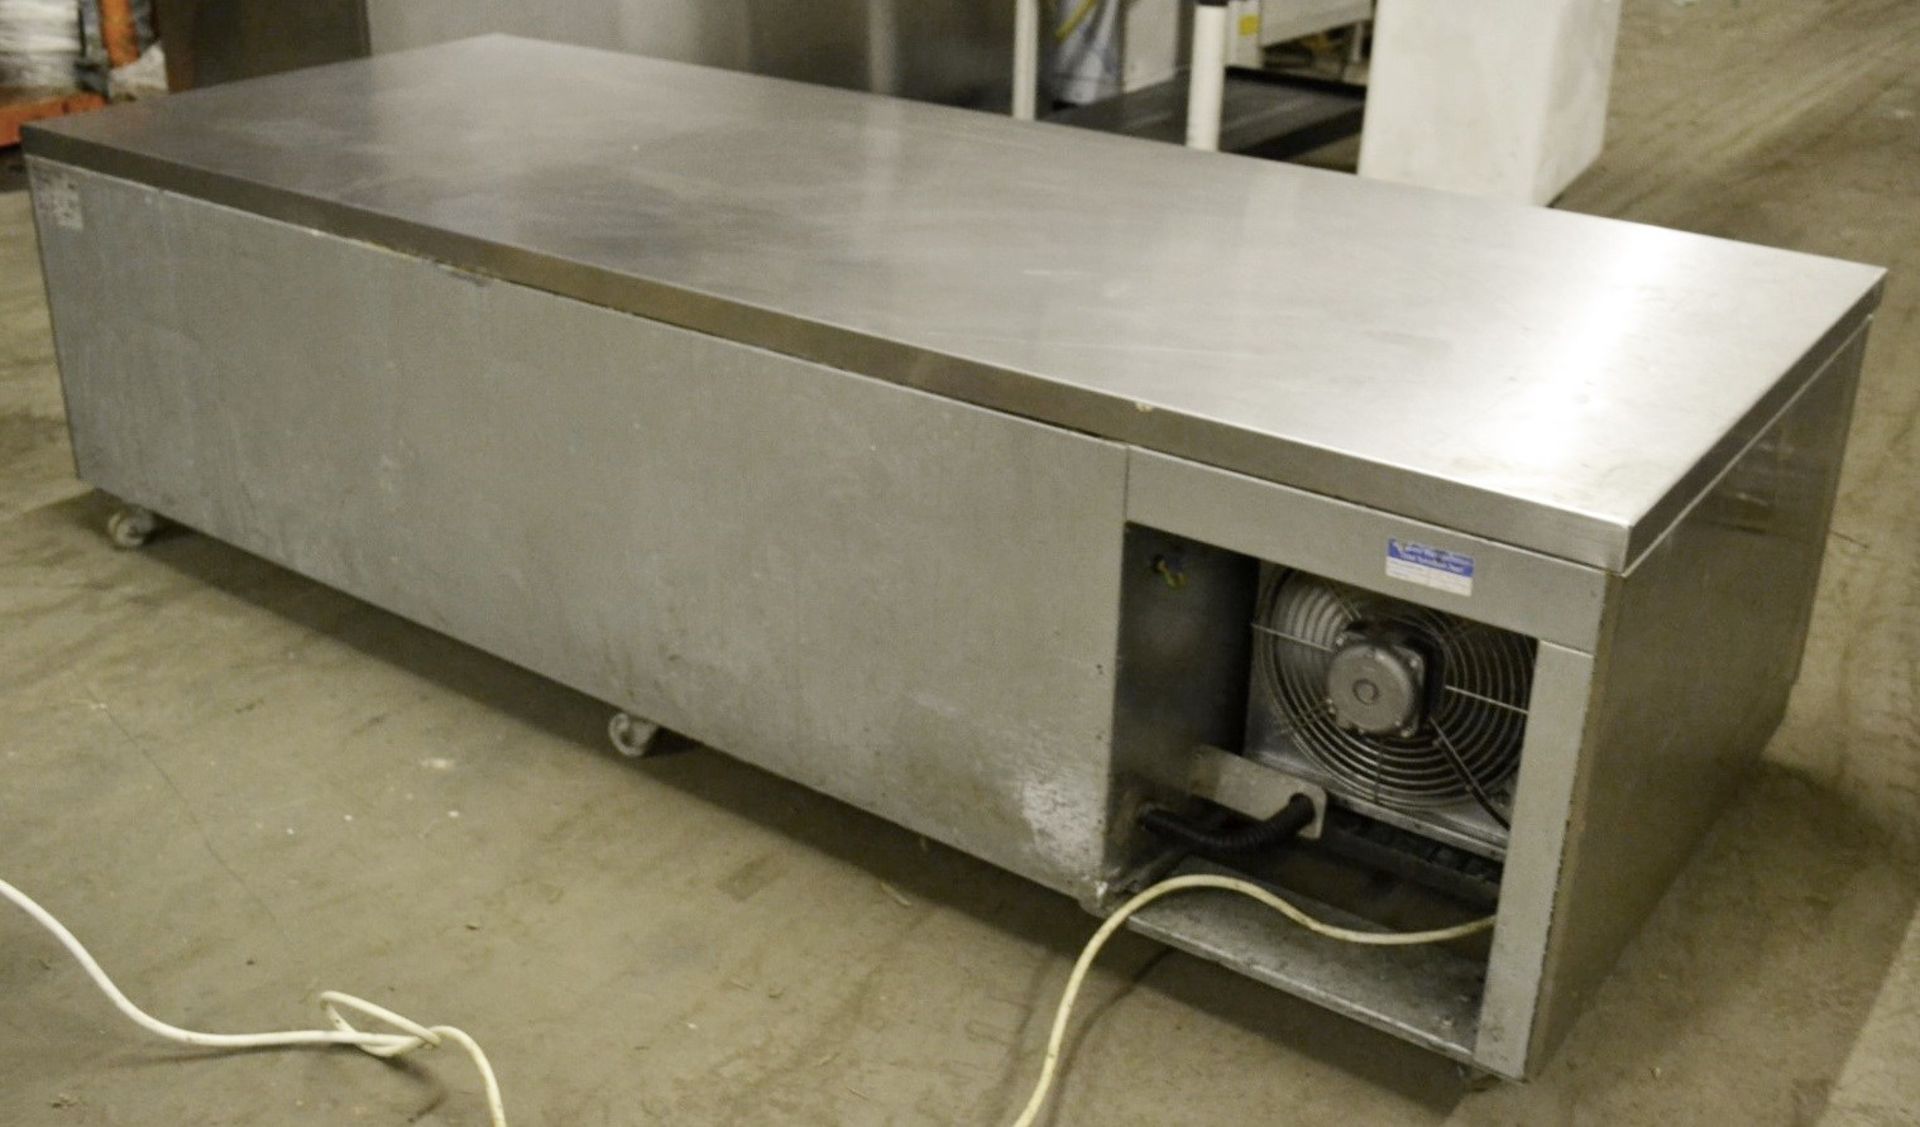 1 x WILLIAM 4-Drawer Stainless Steel Under Broiler (Model UBC20) - City Centre Restaurant - Image 2 of 6